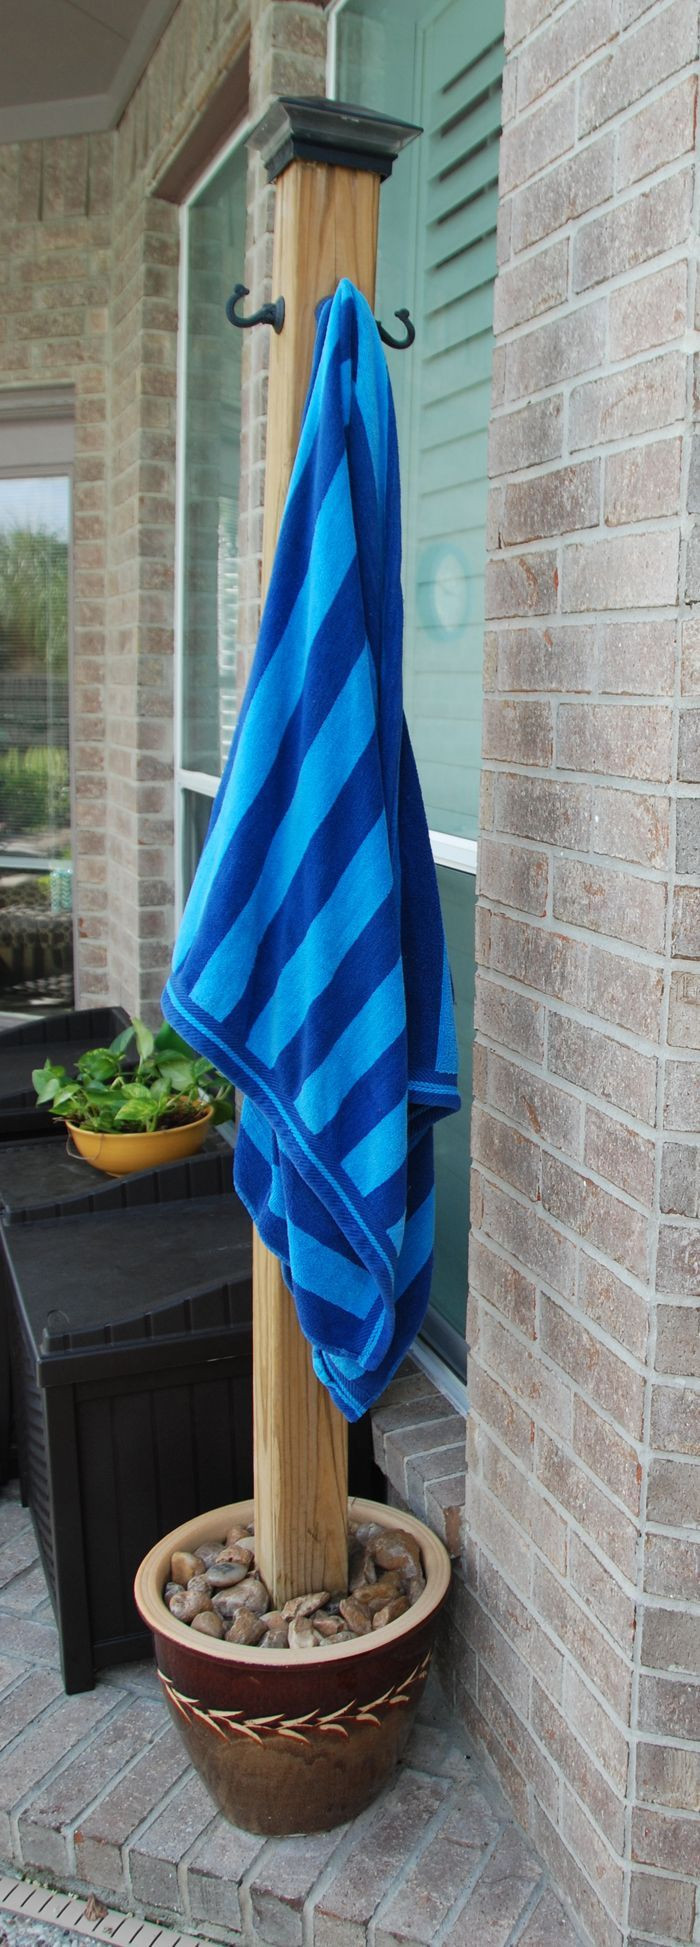 DIY Outdoor Towel Rack
 DIY Pool Towel Holder We made this stand to hang our wet